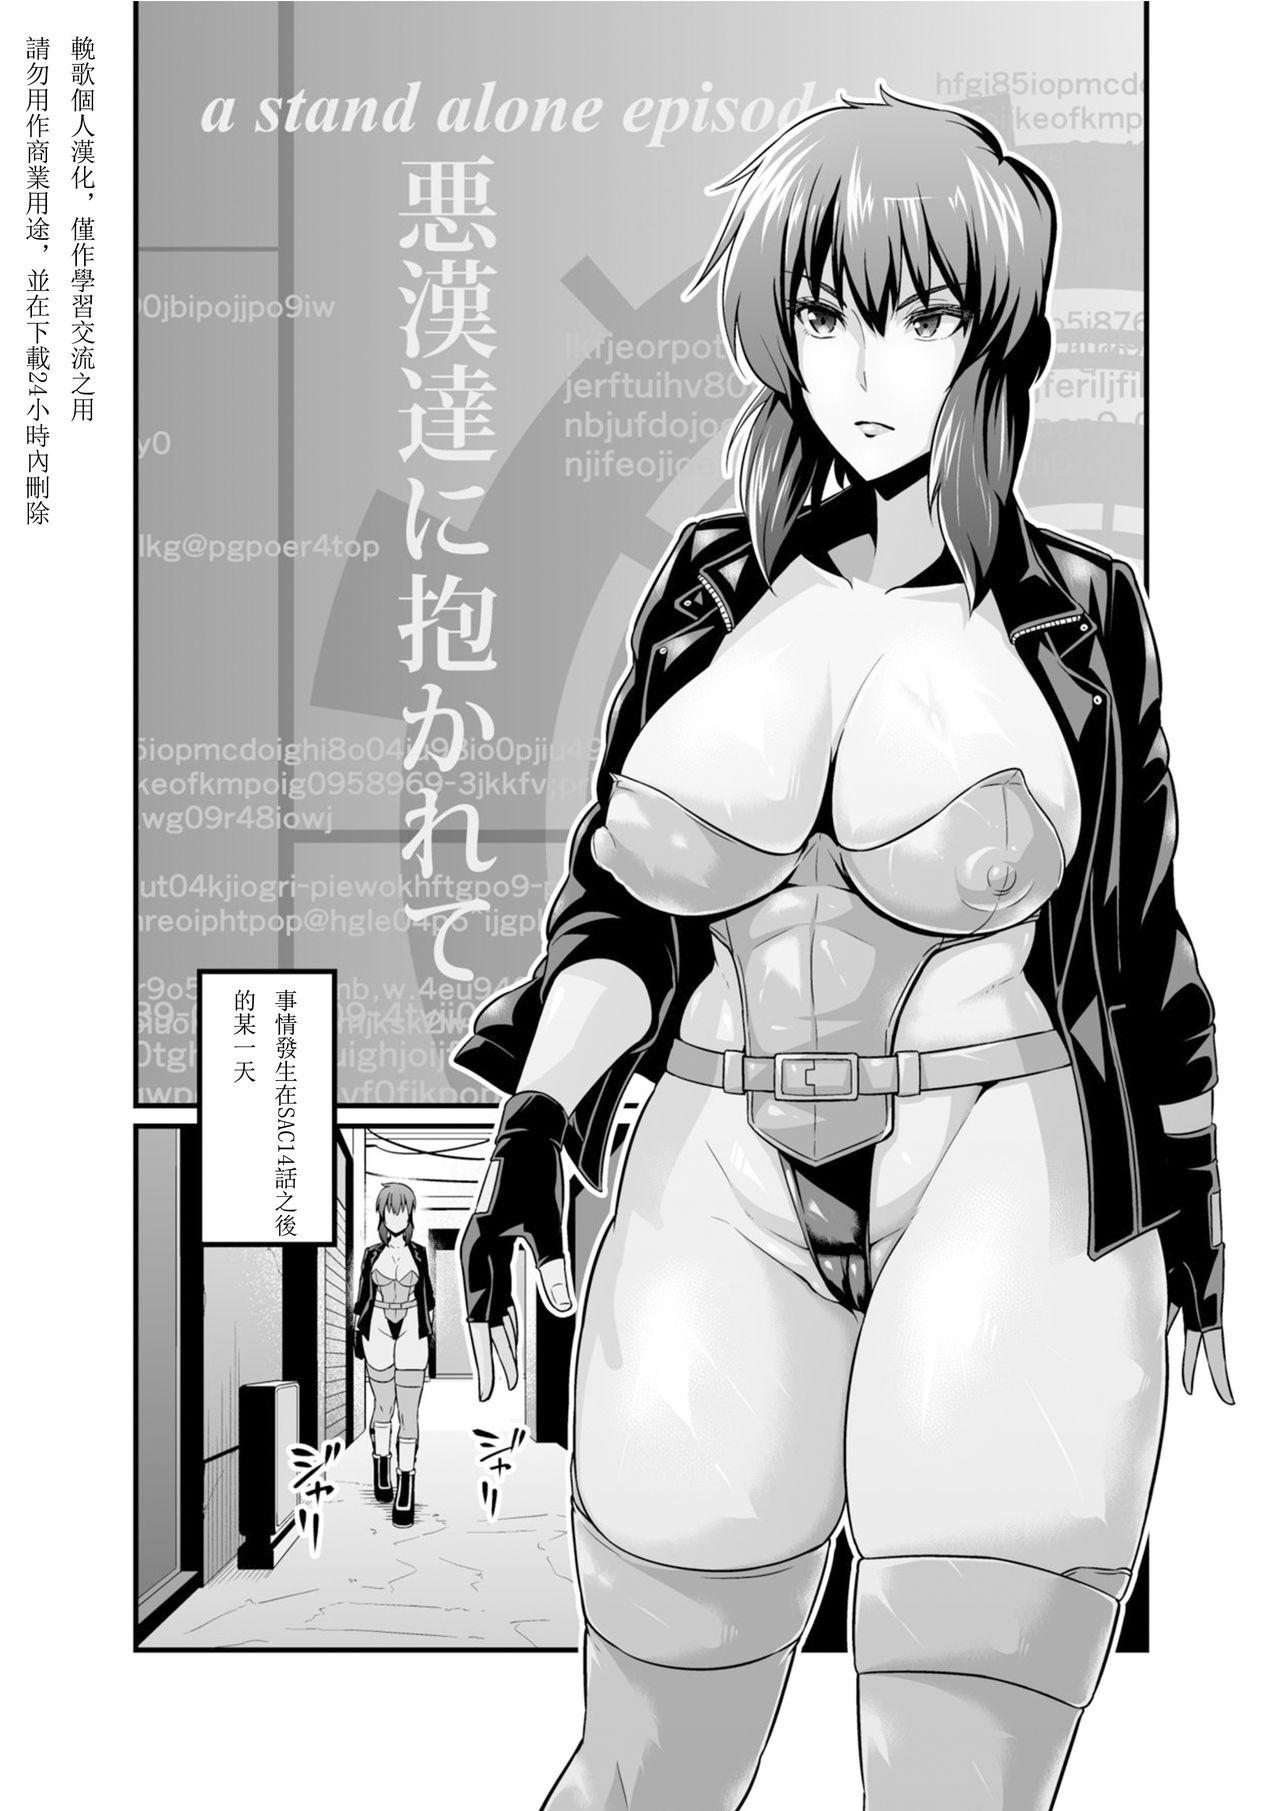 Asians SSS 14.5 - Ghost in the shell American - Page 2